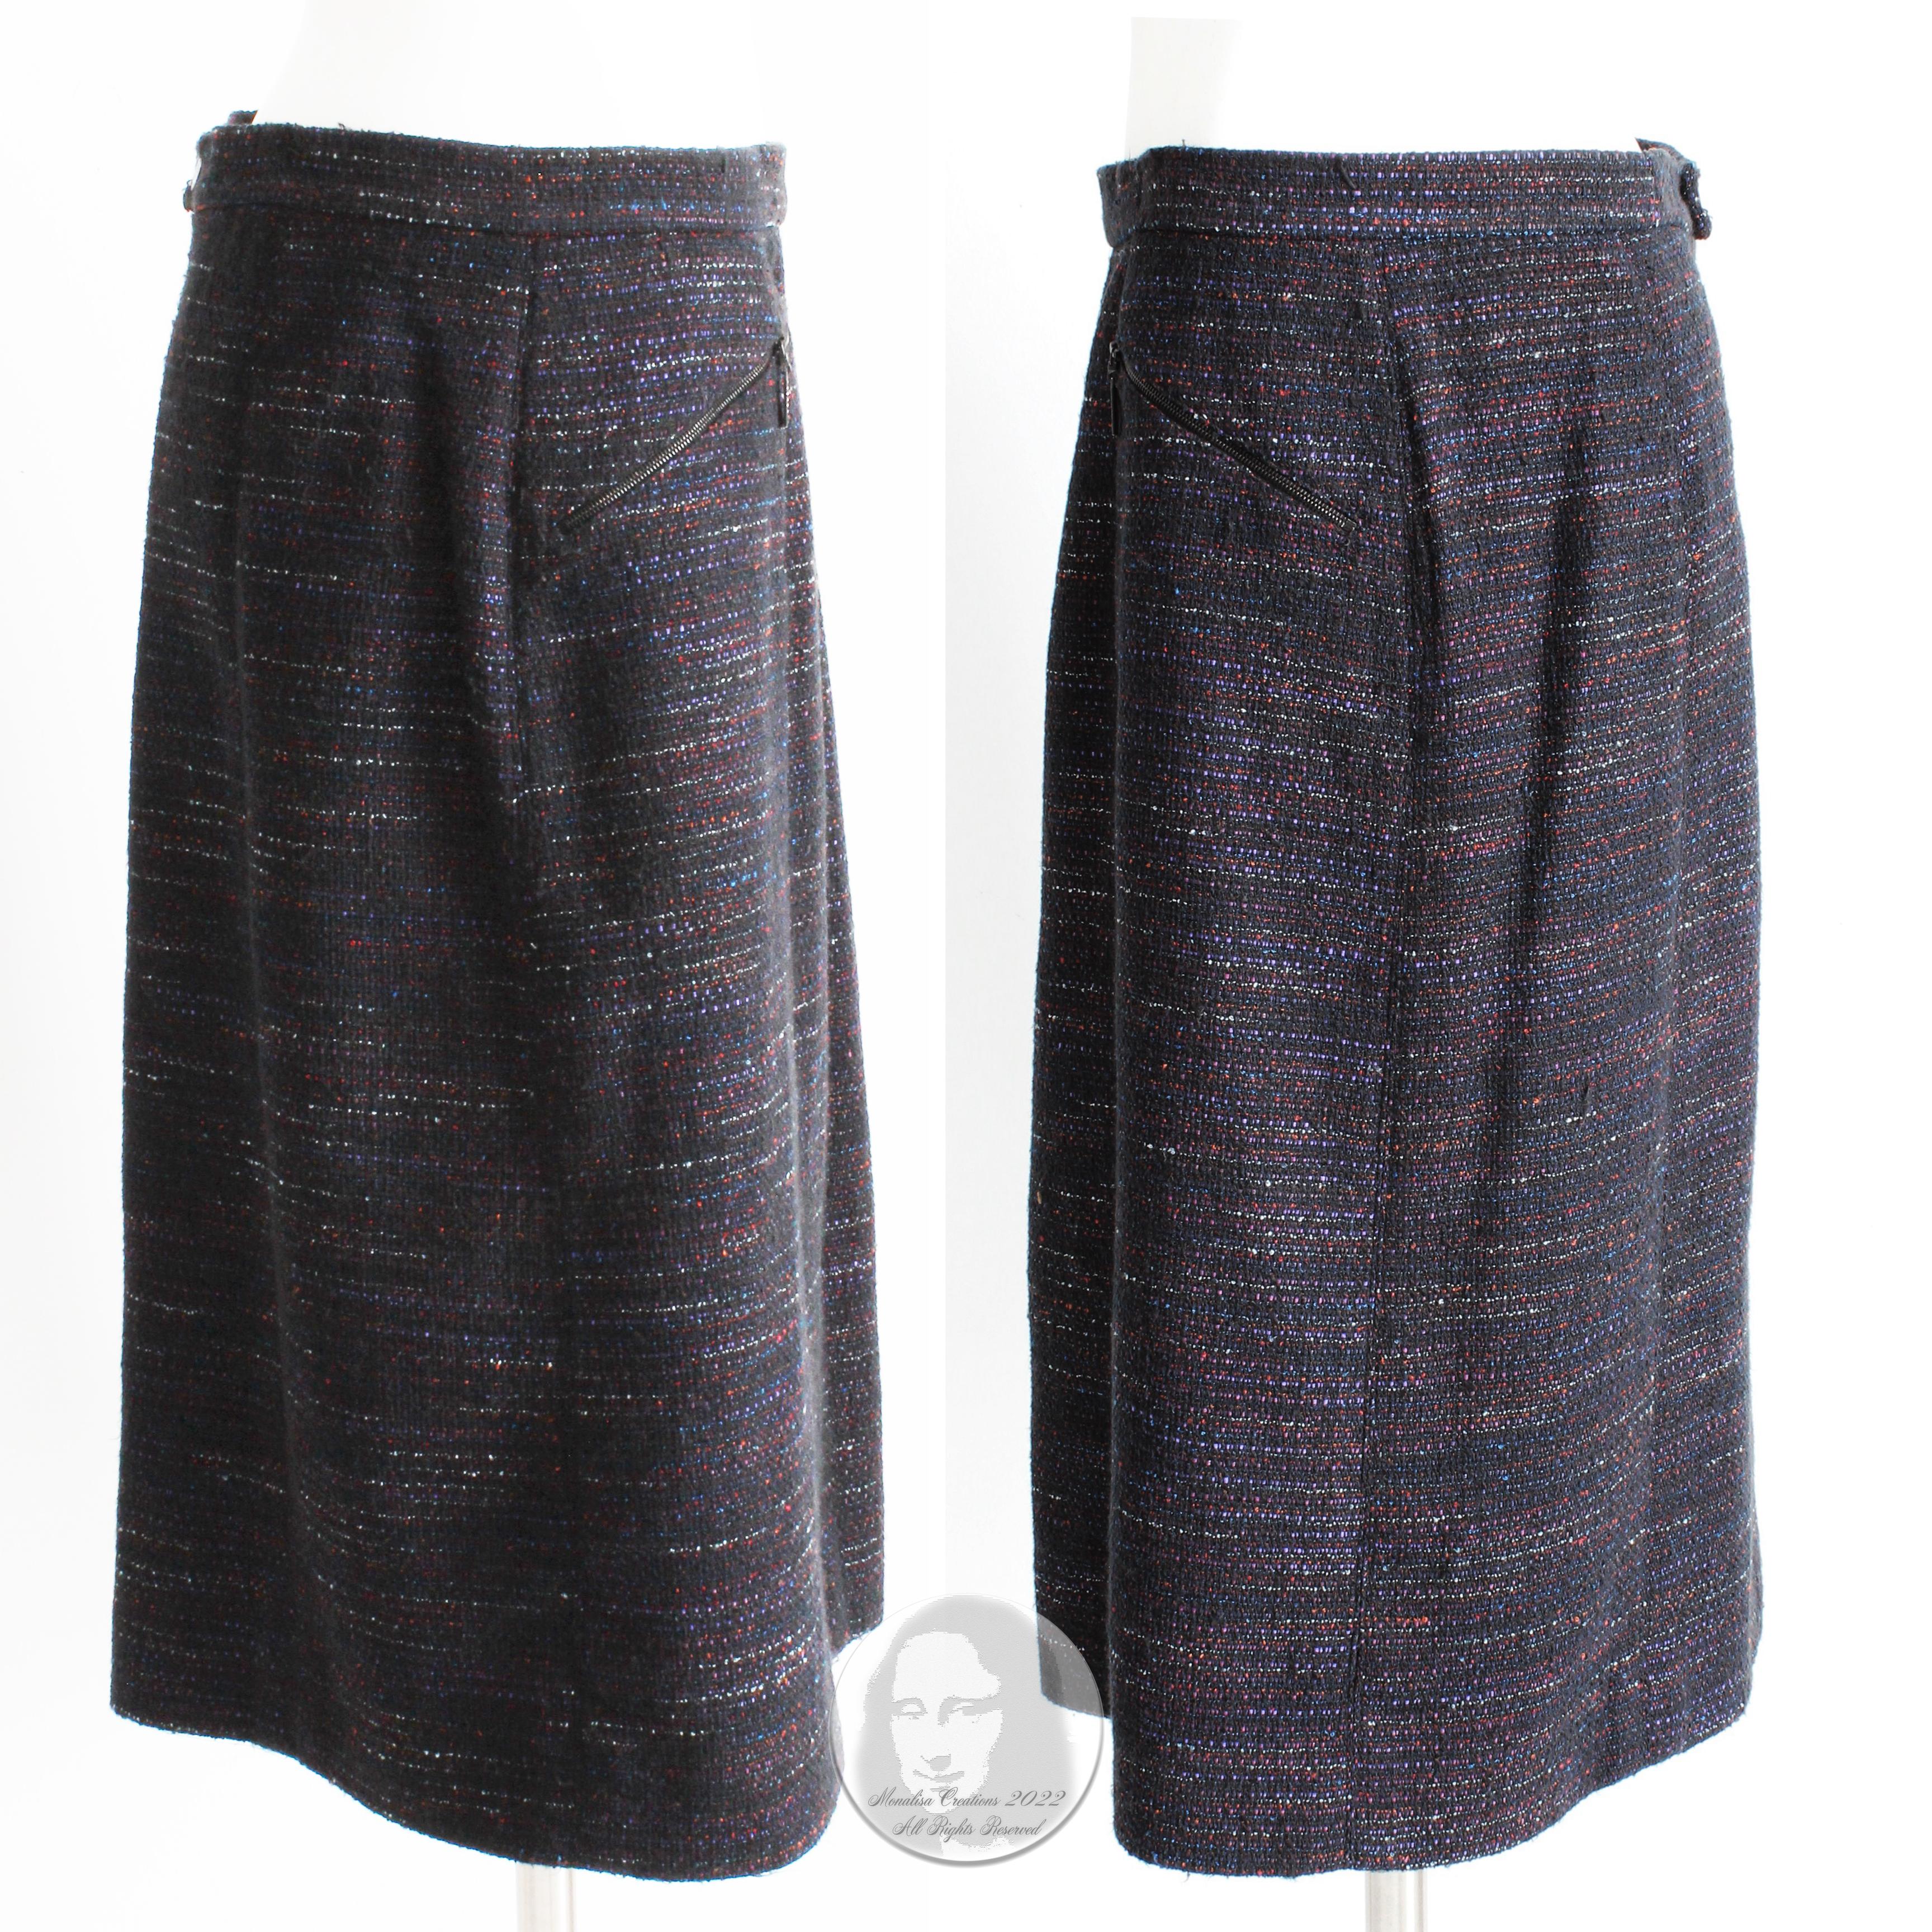 Chanel Skirt Multicolor Cotton Blend Tweed Pencil Style 02A Collection Size 40 2